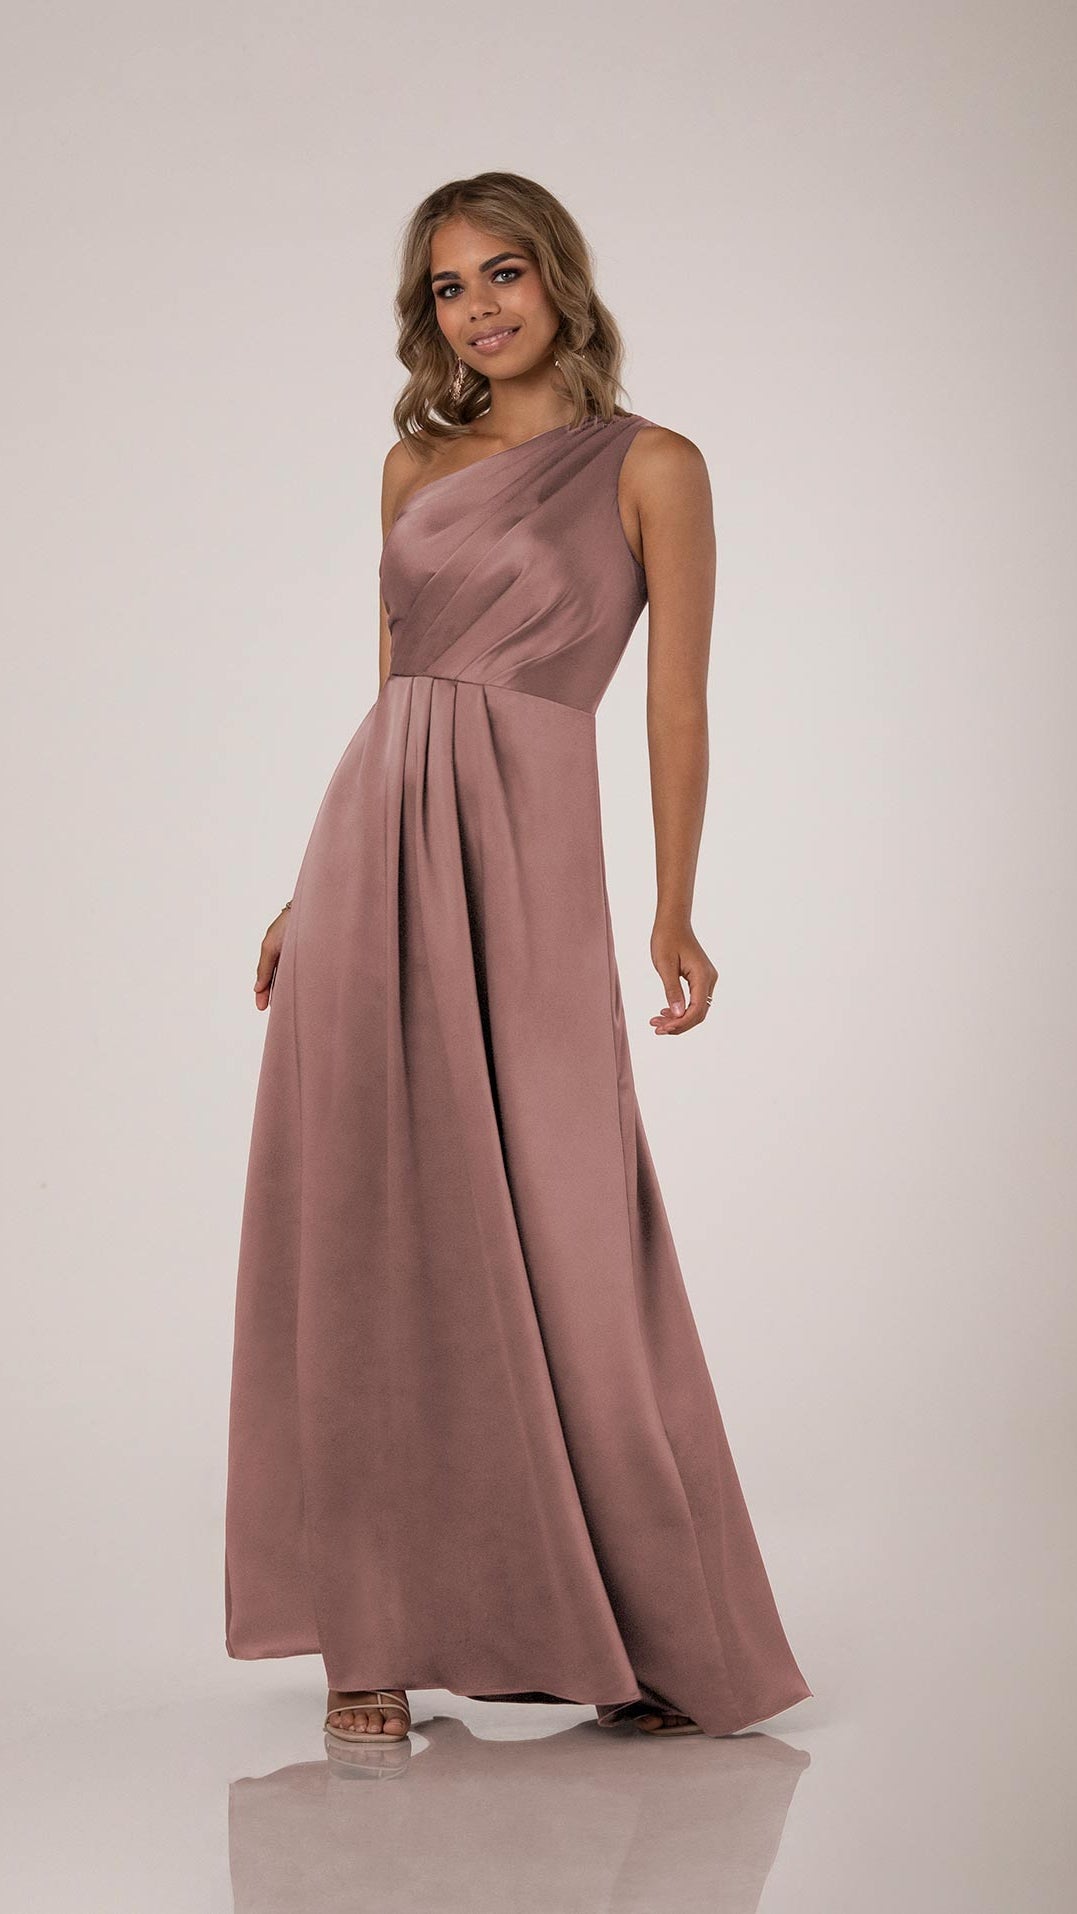 Satin Bridesmaid Dresses for a Botanical Wedding at Syon Park in West  London - Rock My Wedding